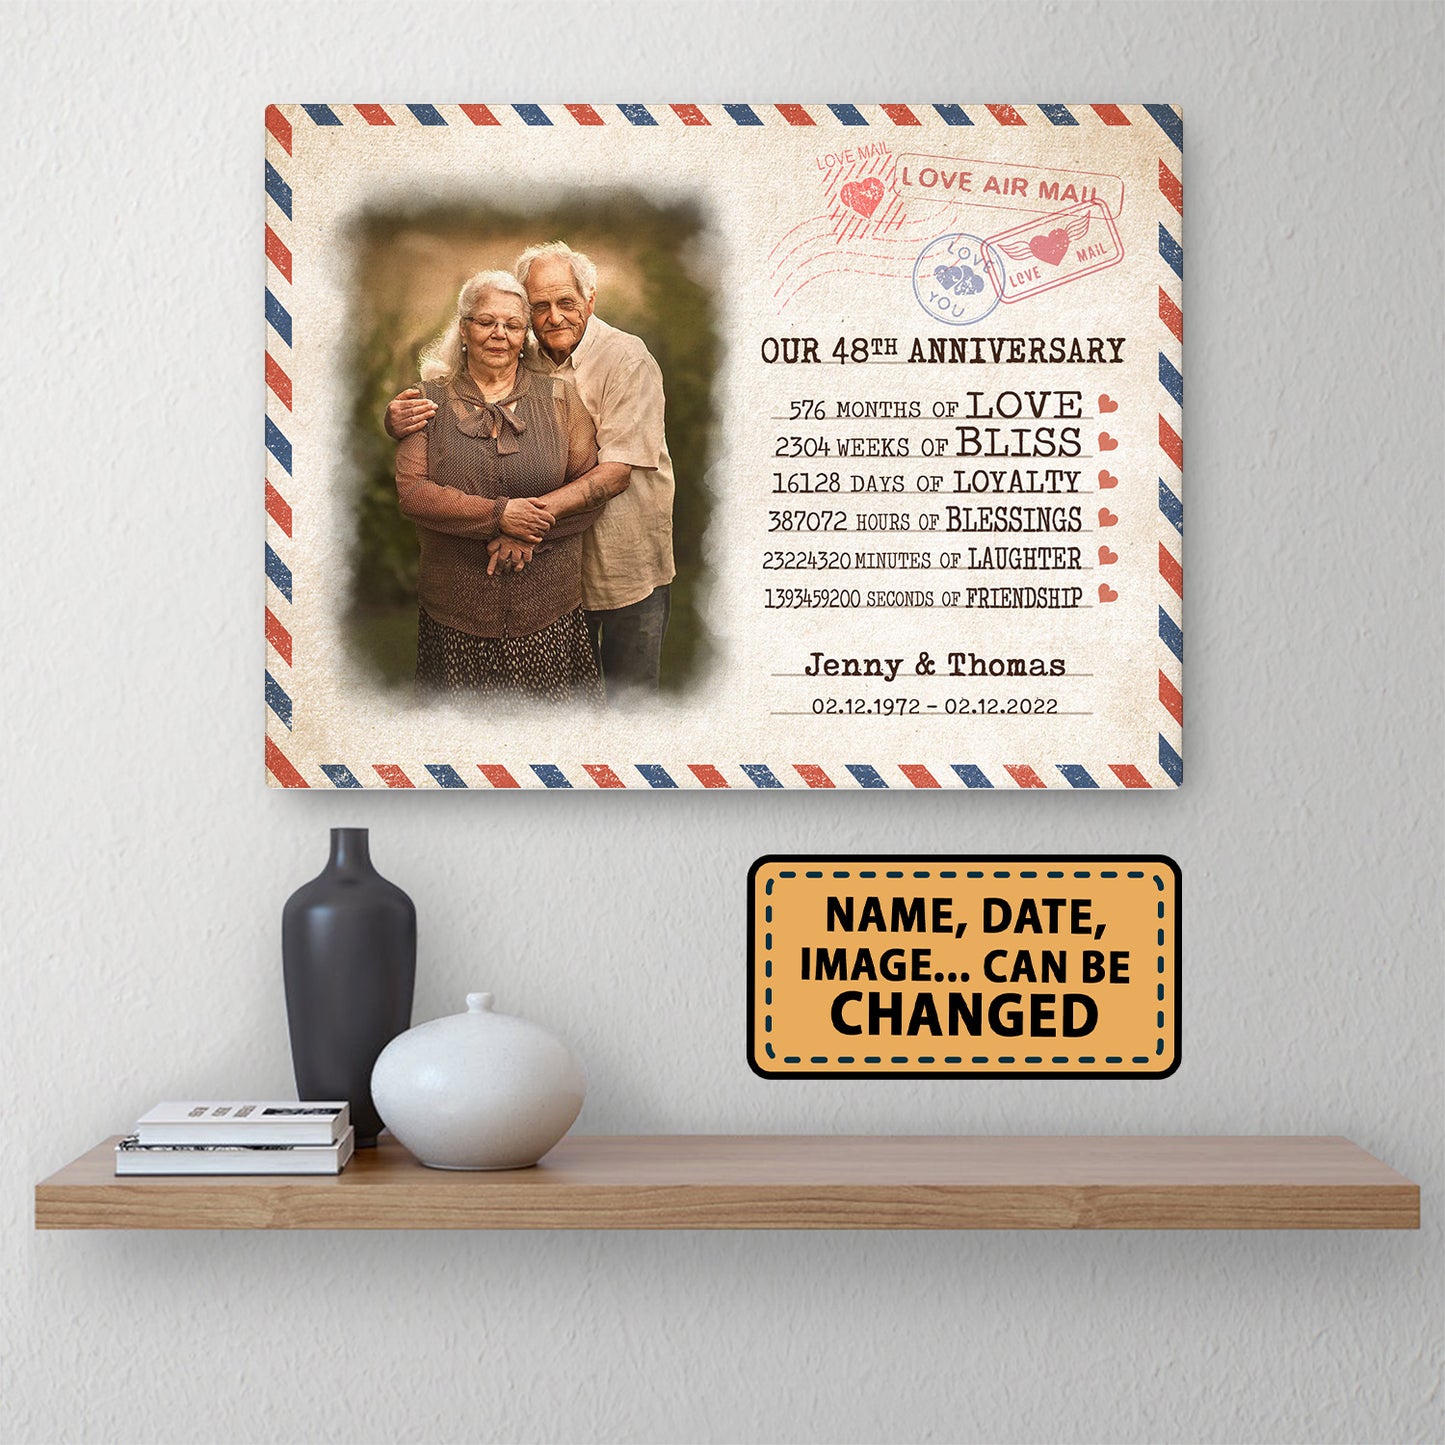 Our 48th Anniversary Letter Valentine Gift Personalized Canvas